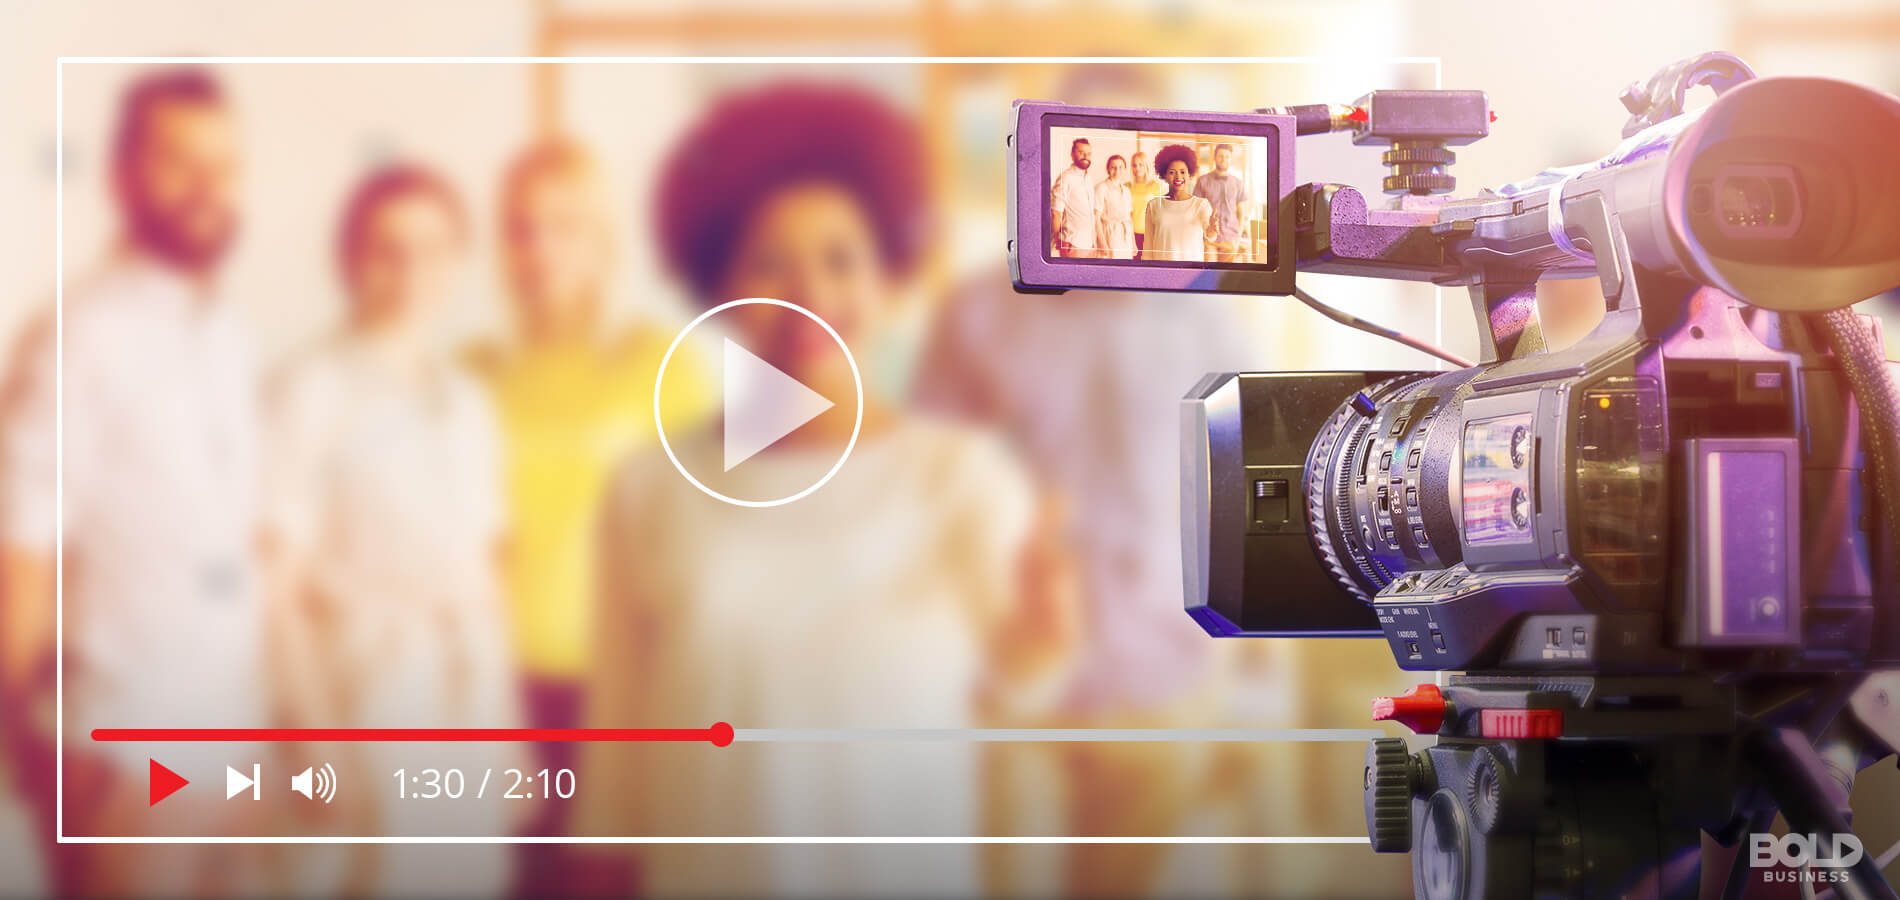 Online video marketing should be an intrinsic part of any growth strategy.